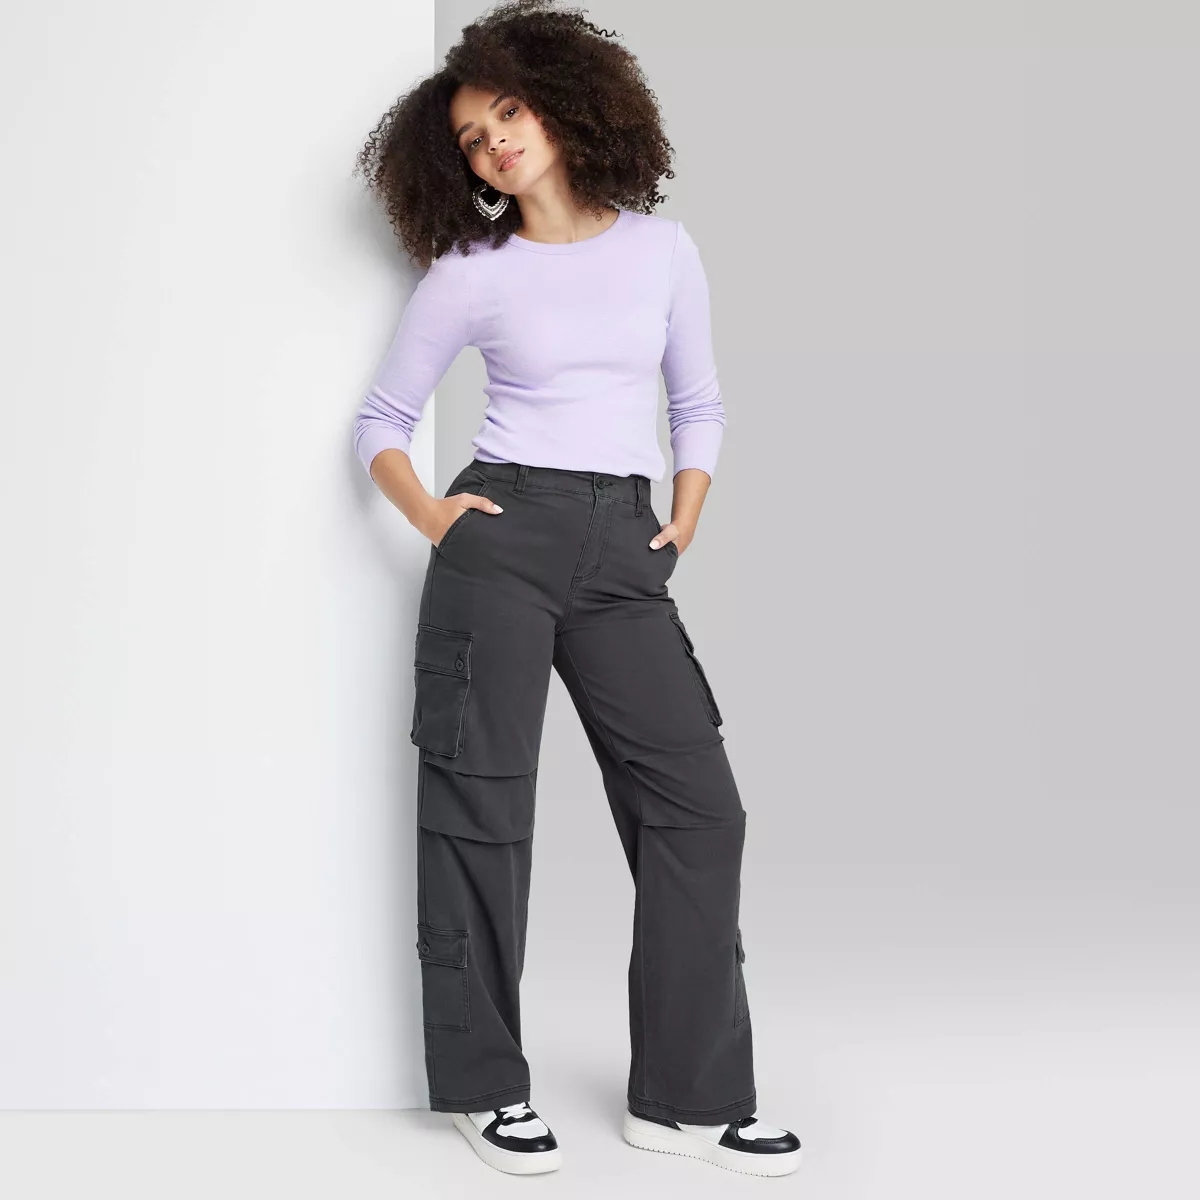 model posing in a lavender top and gray cargo pants, hand on hip, looking towards the camera